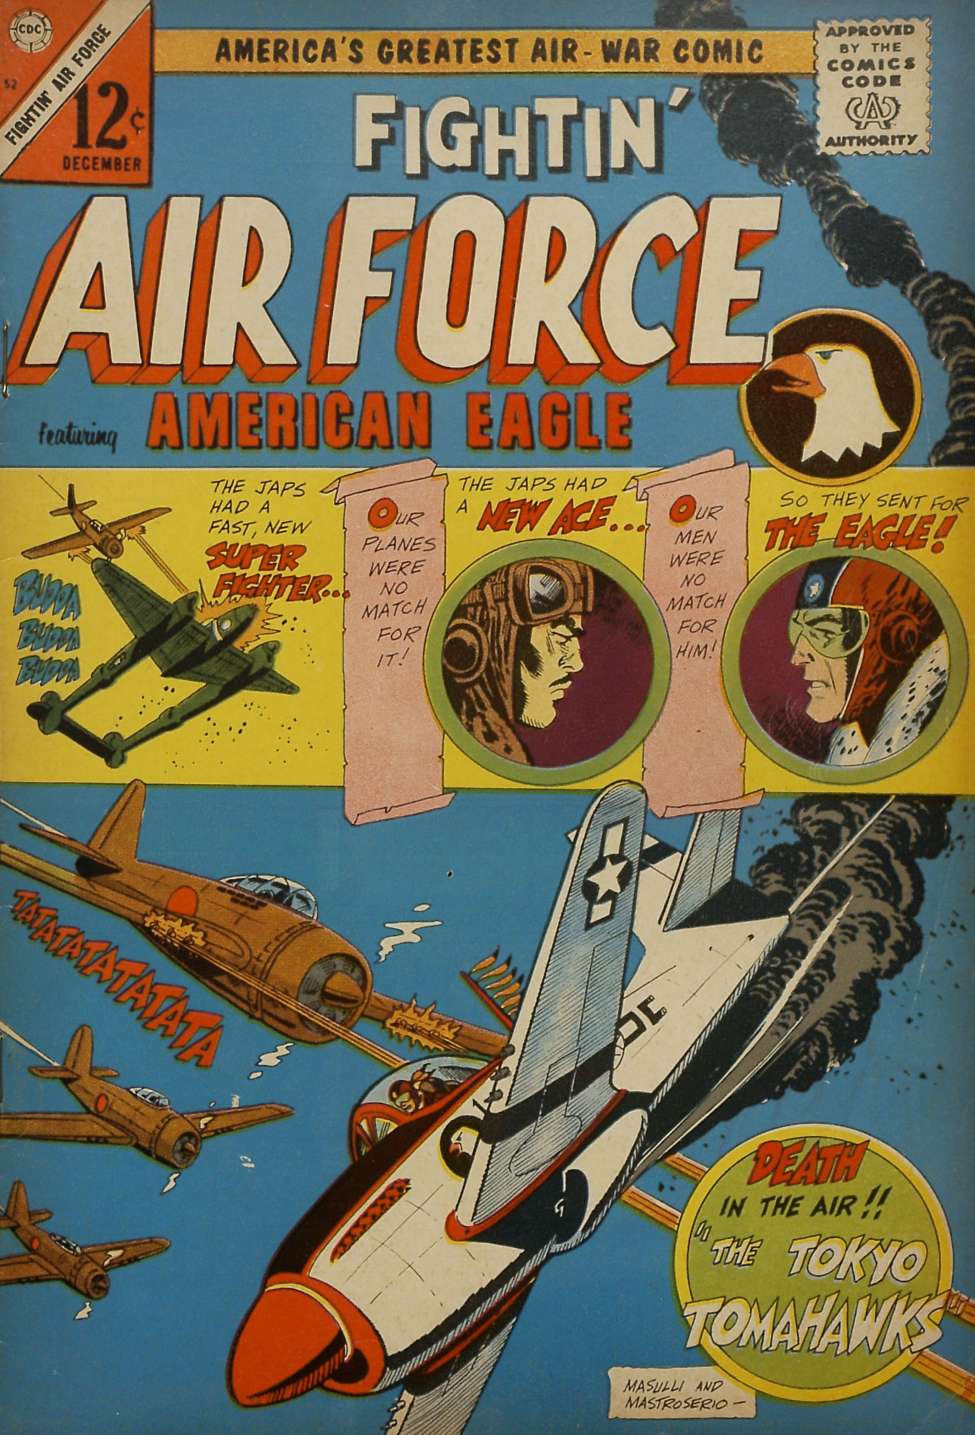 Book Cover For FIghtin' Air Force 52 (alt) - Version 2